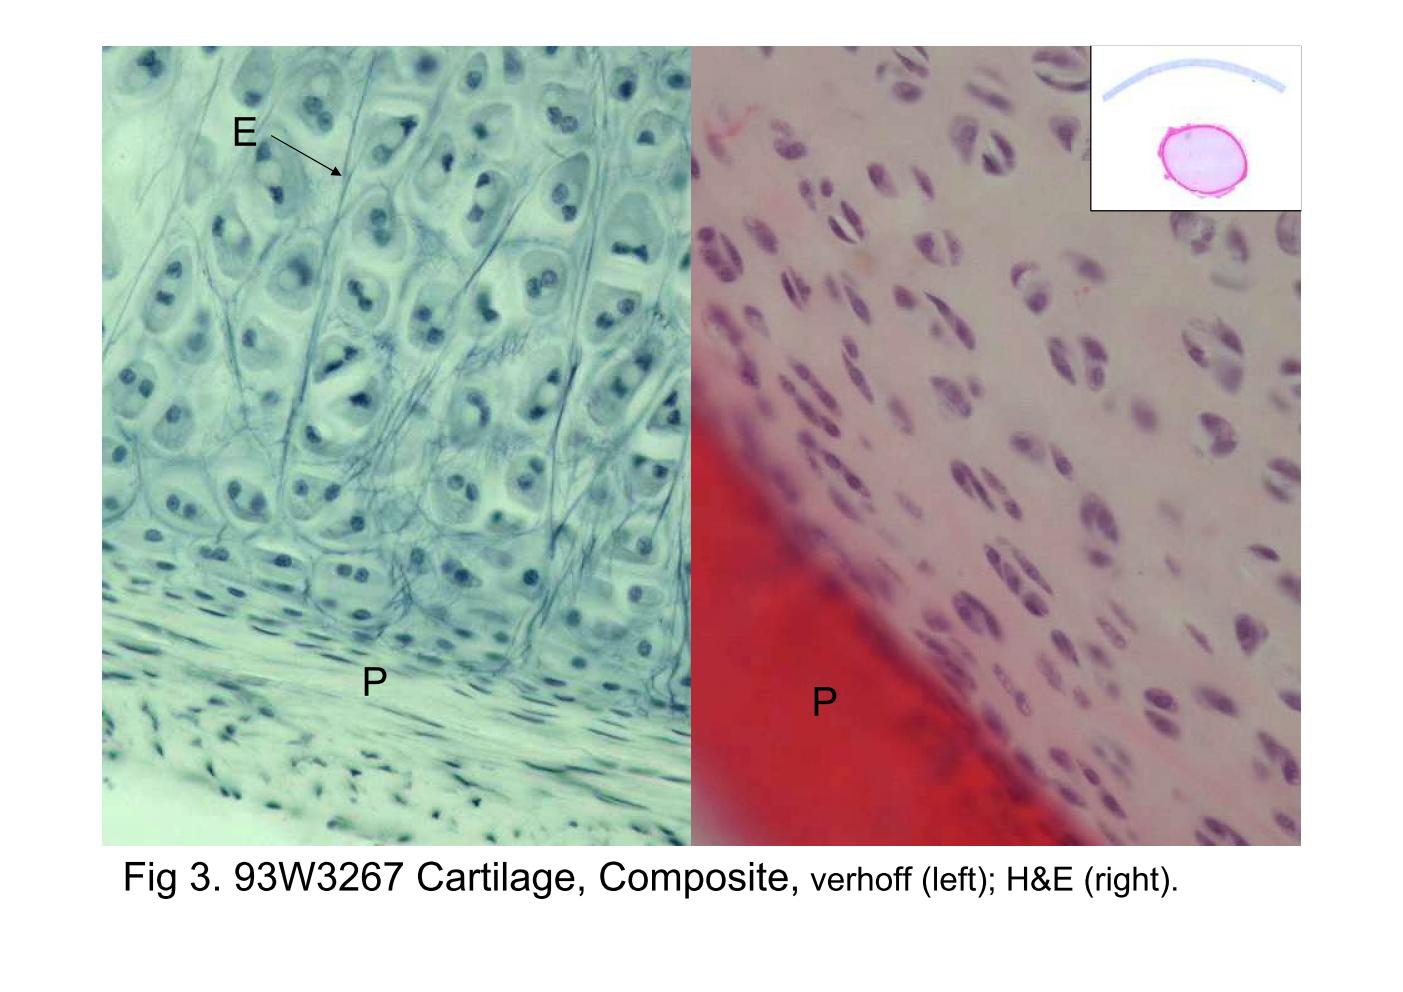 block6-1_09.jpg - Fig 3. 93W3267 Cartilage, Composite,        verhoff (left) H&E (right).There are two sections in this slide (inset): upper one is elasticcartilage and lower one is hyaline cartilage. These sections aretaken from young, growing cartilages and both of them aresurrounded by the perichondrium (P). The mainly distinguishedfeature of hyaline and elastic cartilages is the elastic fibers (E),which are only found in elastic cartilage. The commonhistological structure of elastic cartilage is similar to that ofhyaline cartilage, its elasticity, however, being derived from thepresence of numerous bundles of branching elastic fibres in thecartilage matrix.